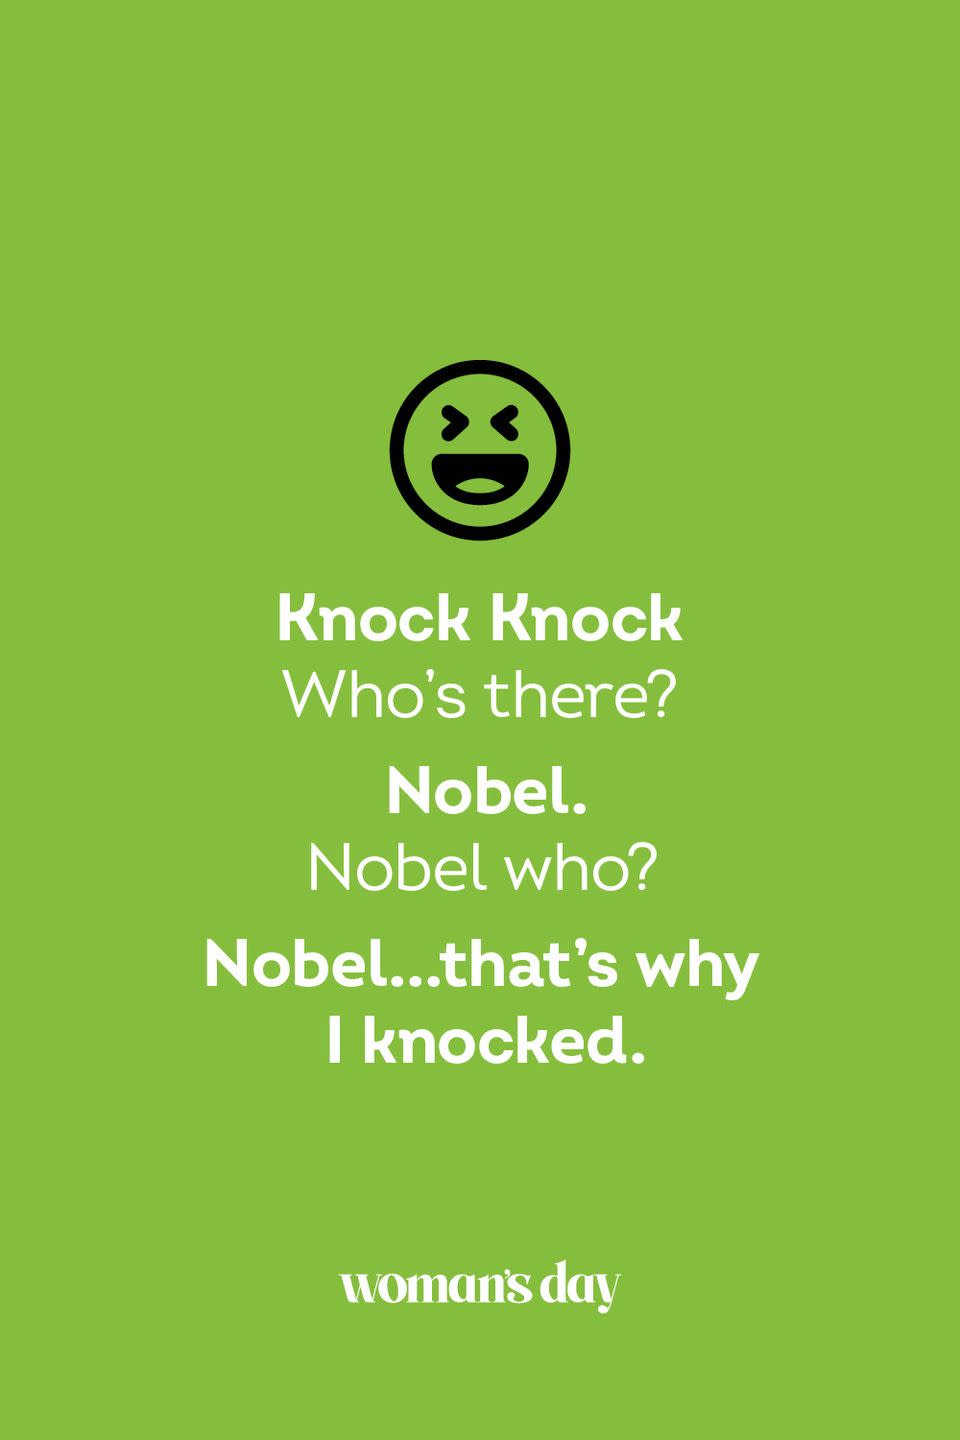 <p><strong>Knock Knock</strong></p><p><em>Who’s there? </em></p><p><strong>Nobel.</strong></p><p><em>Nobel who?</em></p><p><strong>Nobel... that’s why I knocked.</strong></p>